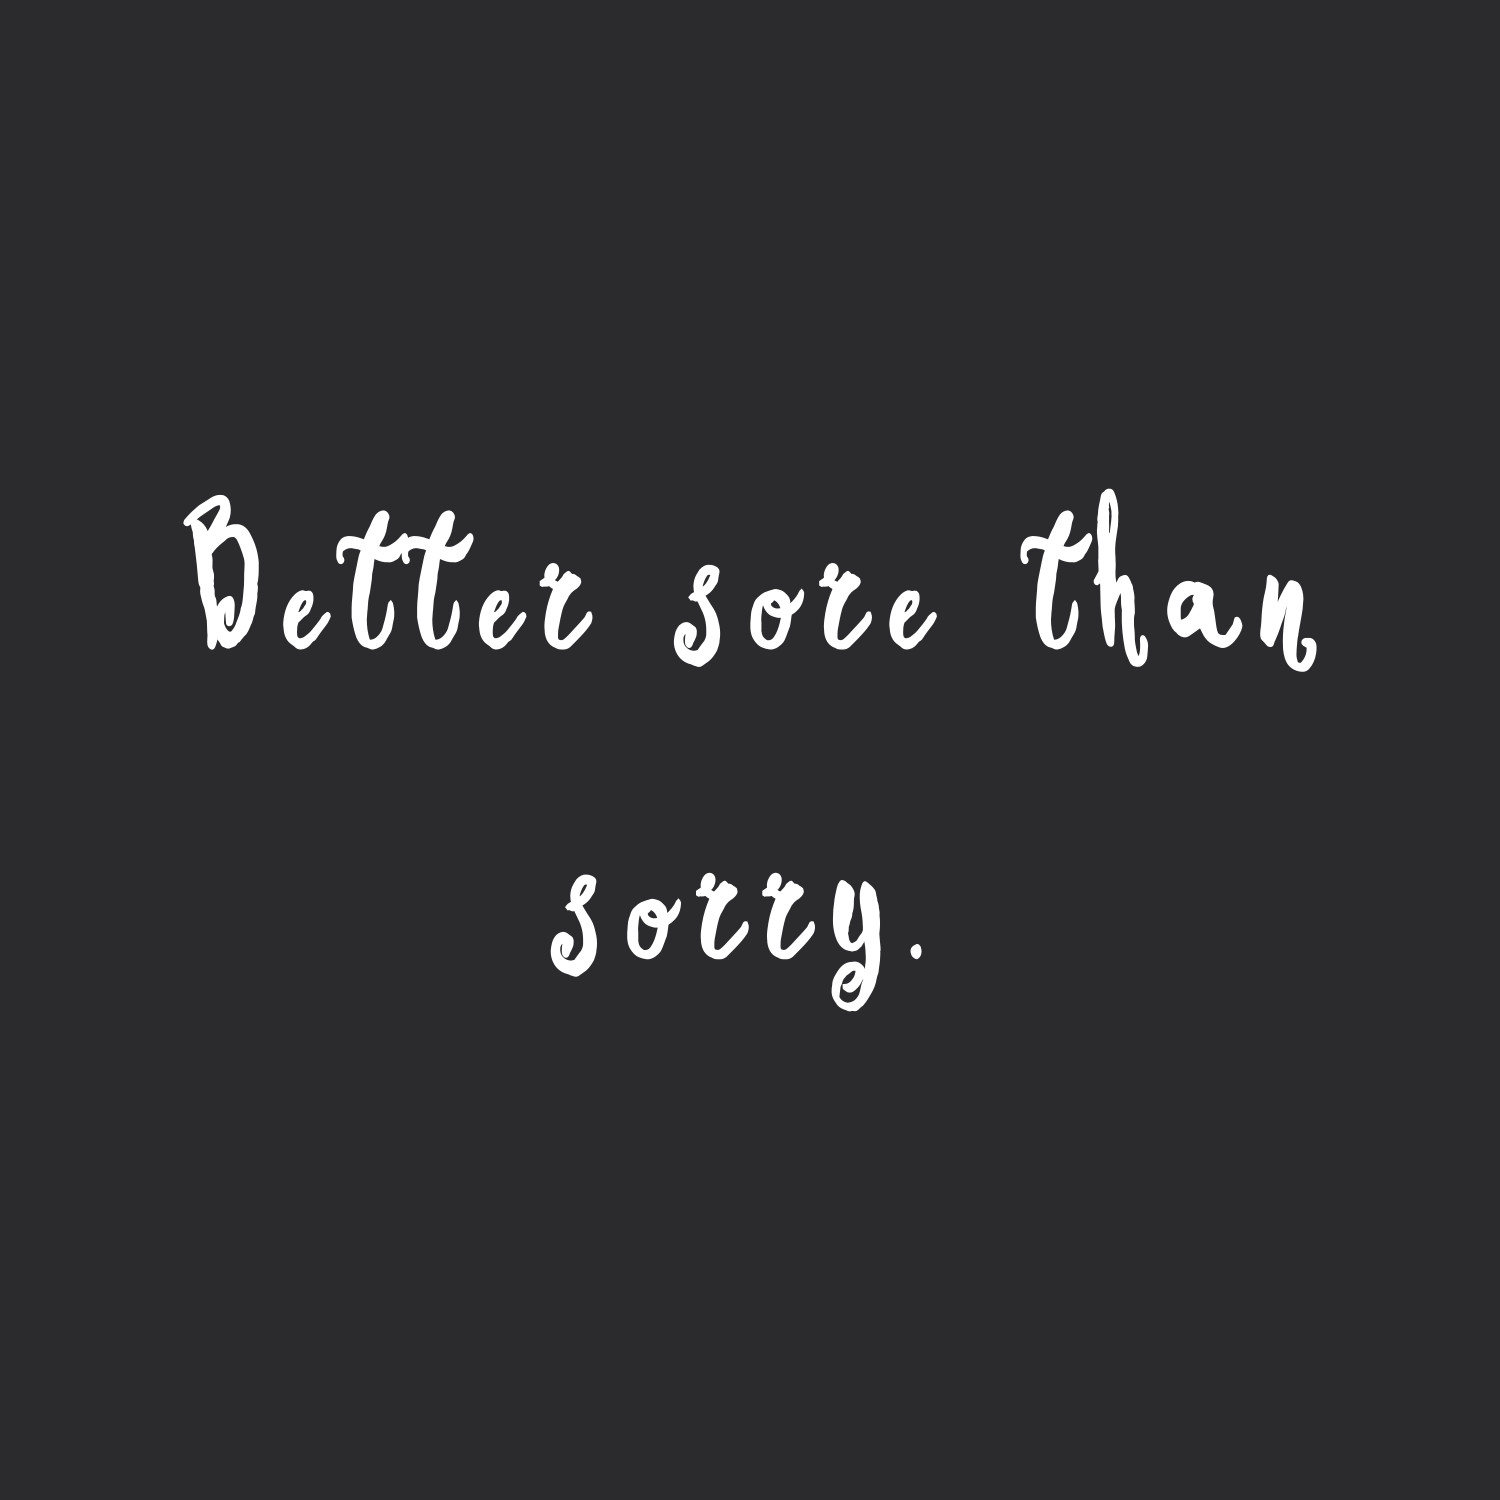 Better sore than sorry! Browse our collection of inspirational exercise and fitness quotes and get instant training and healthy eating motivation. Transform positive thoughts into positive actions and get fit, healthy and happy! https://www.spotebi.com/workout-motivation/better-sore-than-sorry/